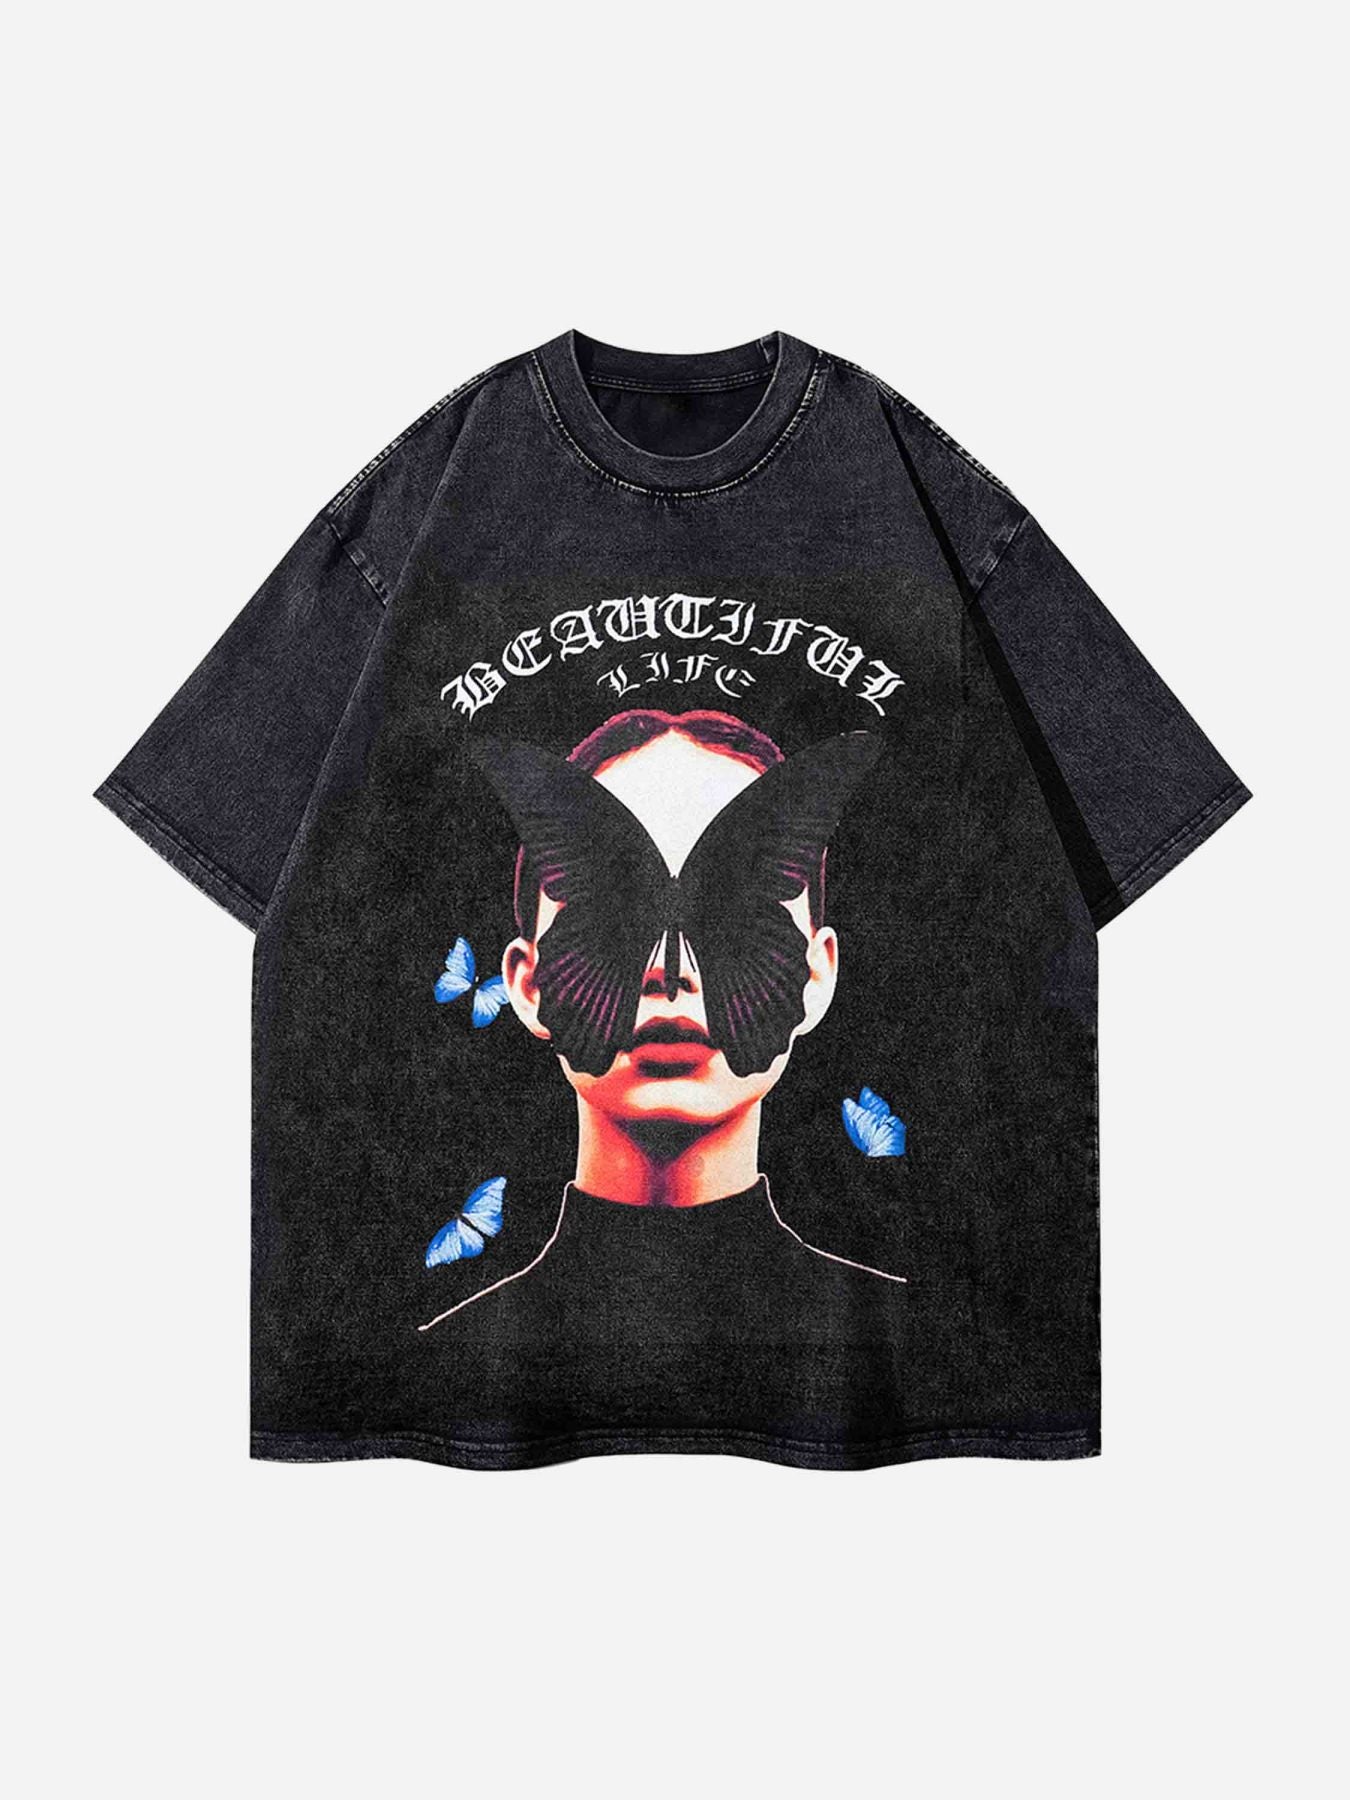 The Supermade Black Butterfly Girl T-shirt